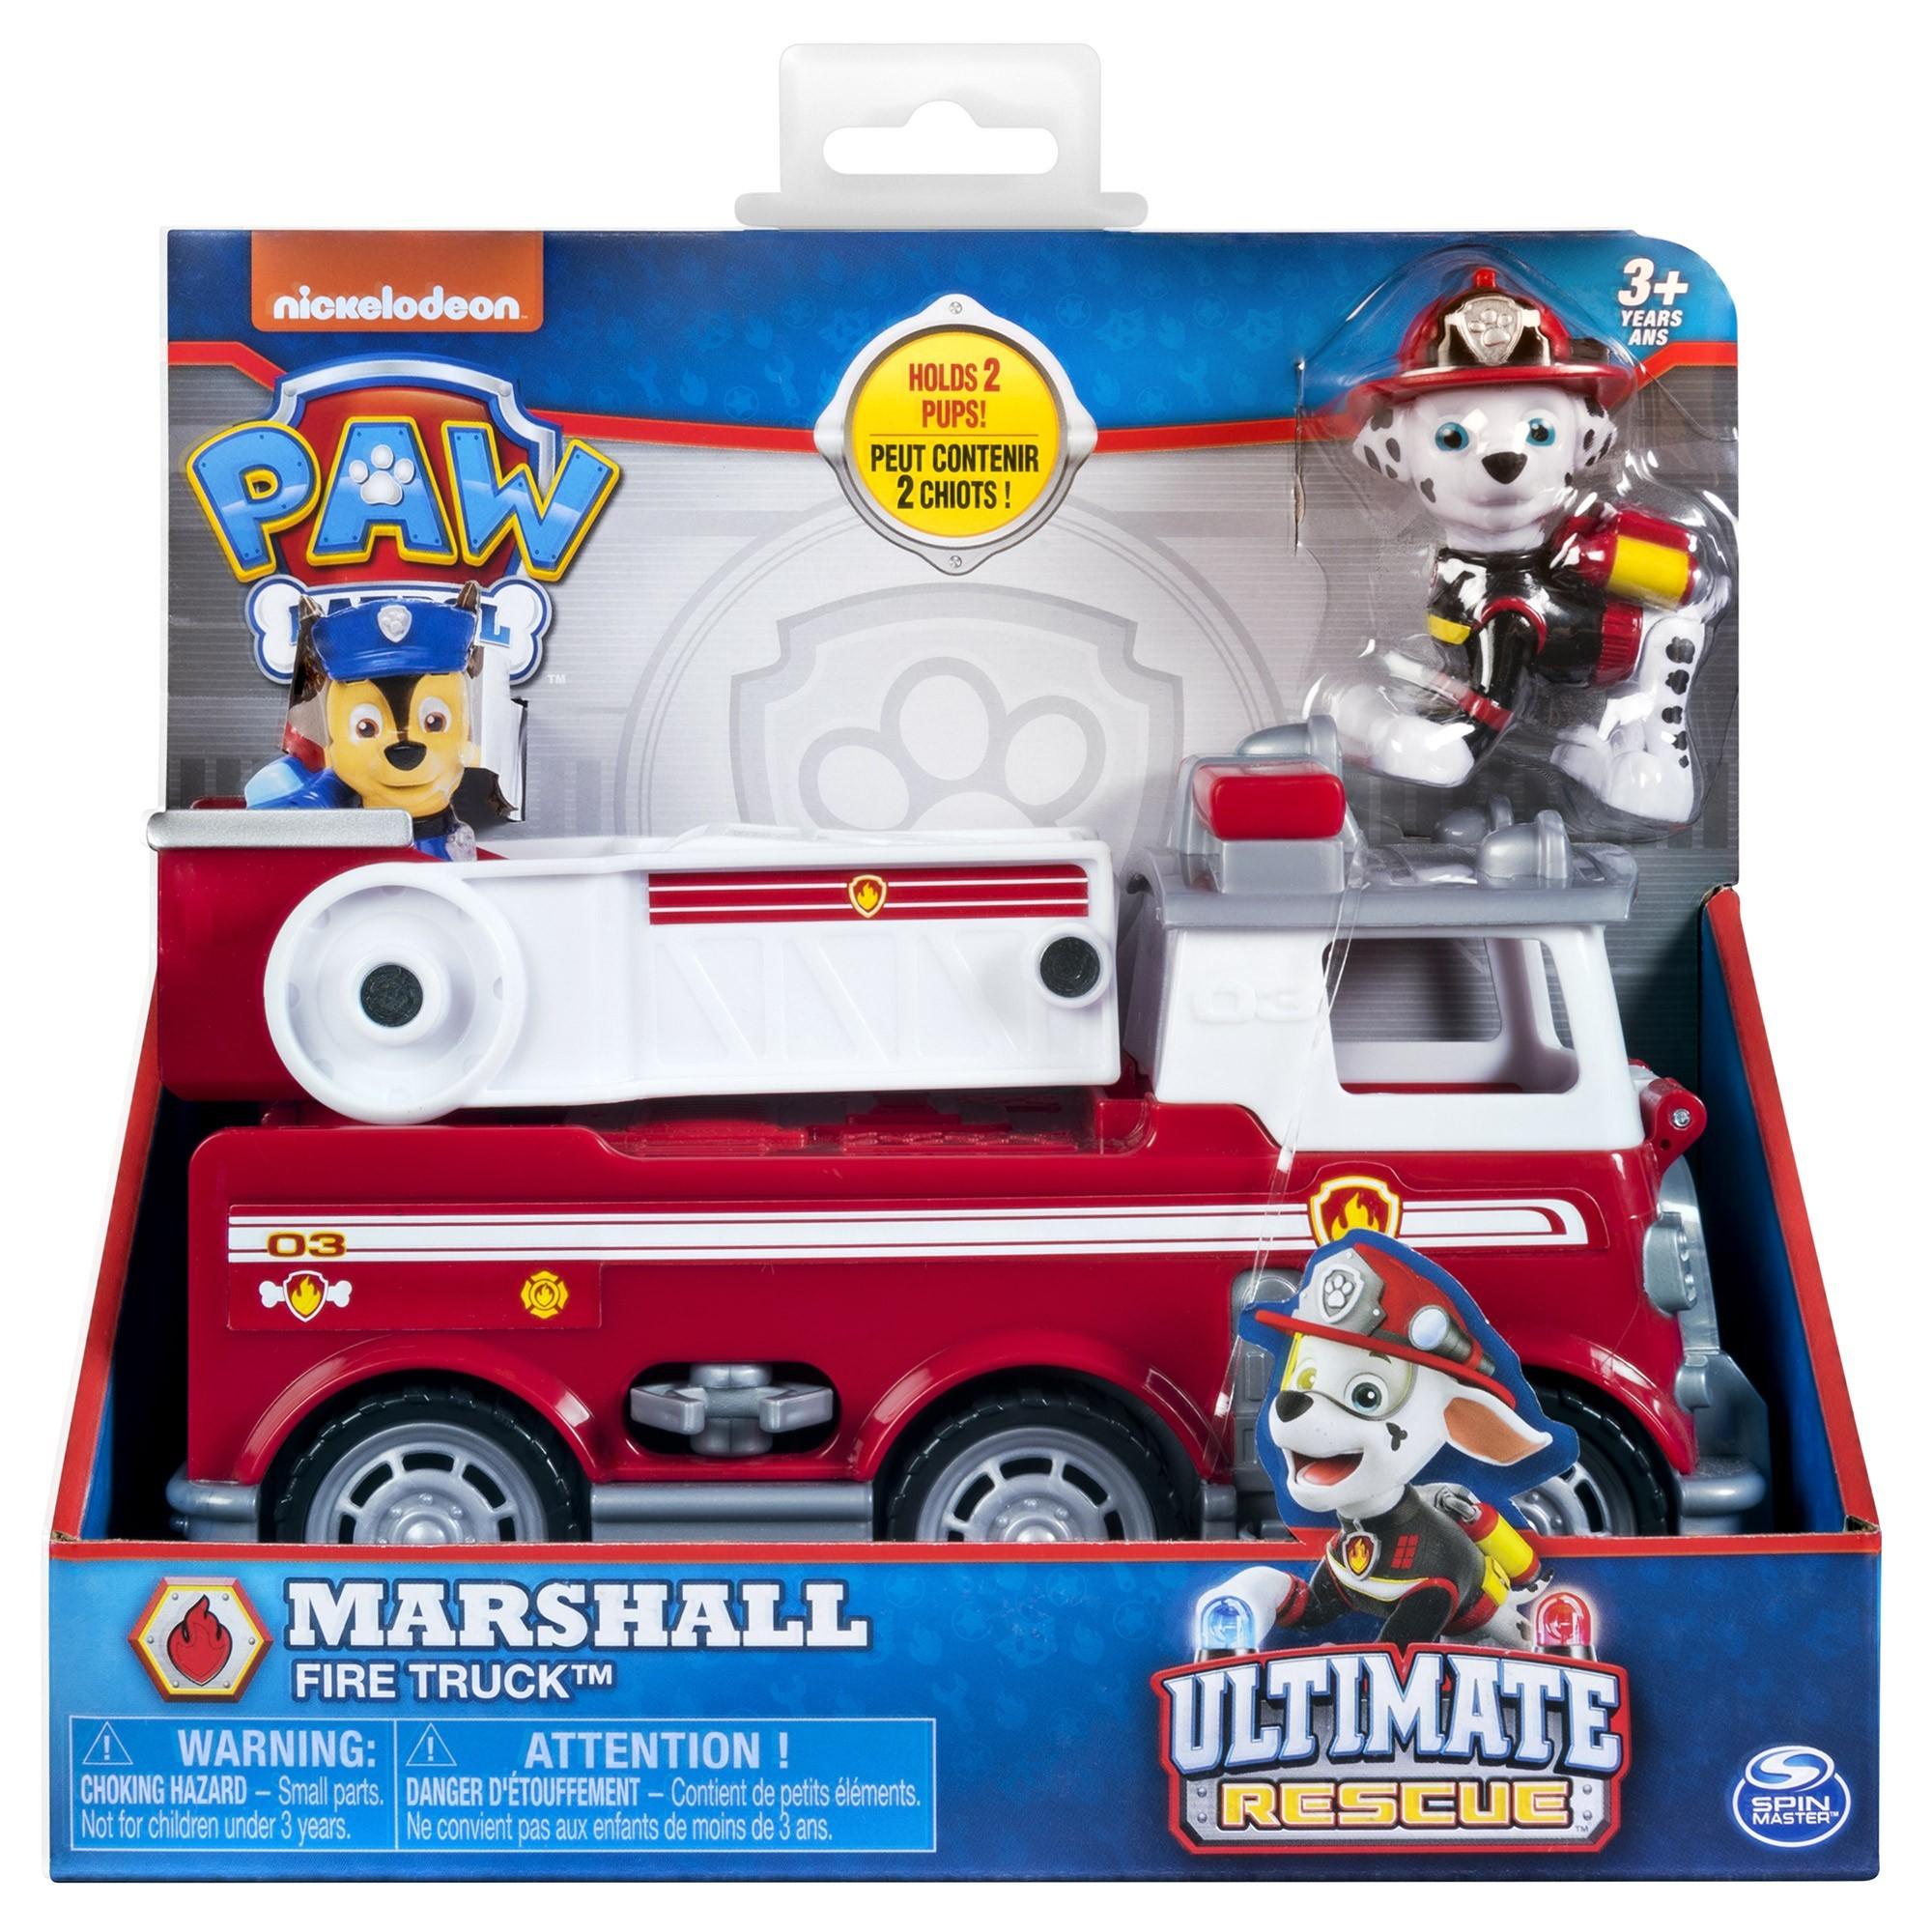 Paw Patrol Ultimate Rescue Fire Truck - Marshall review and price